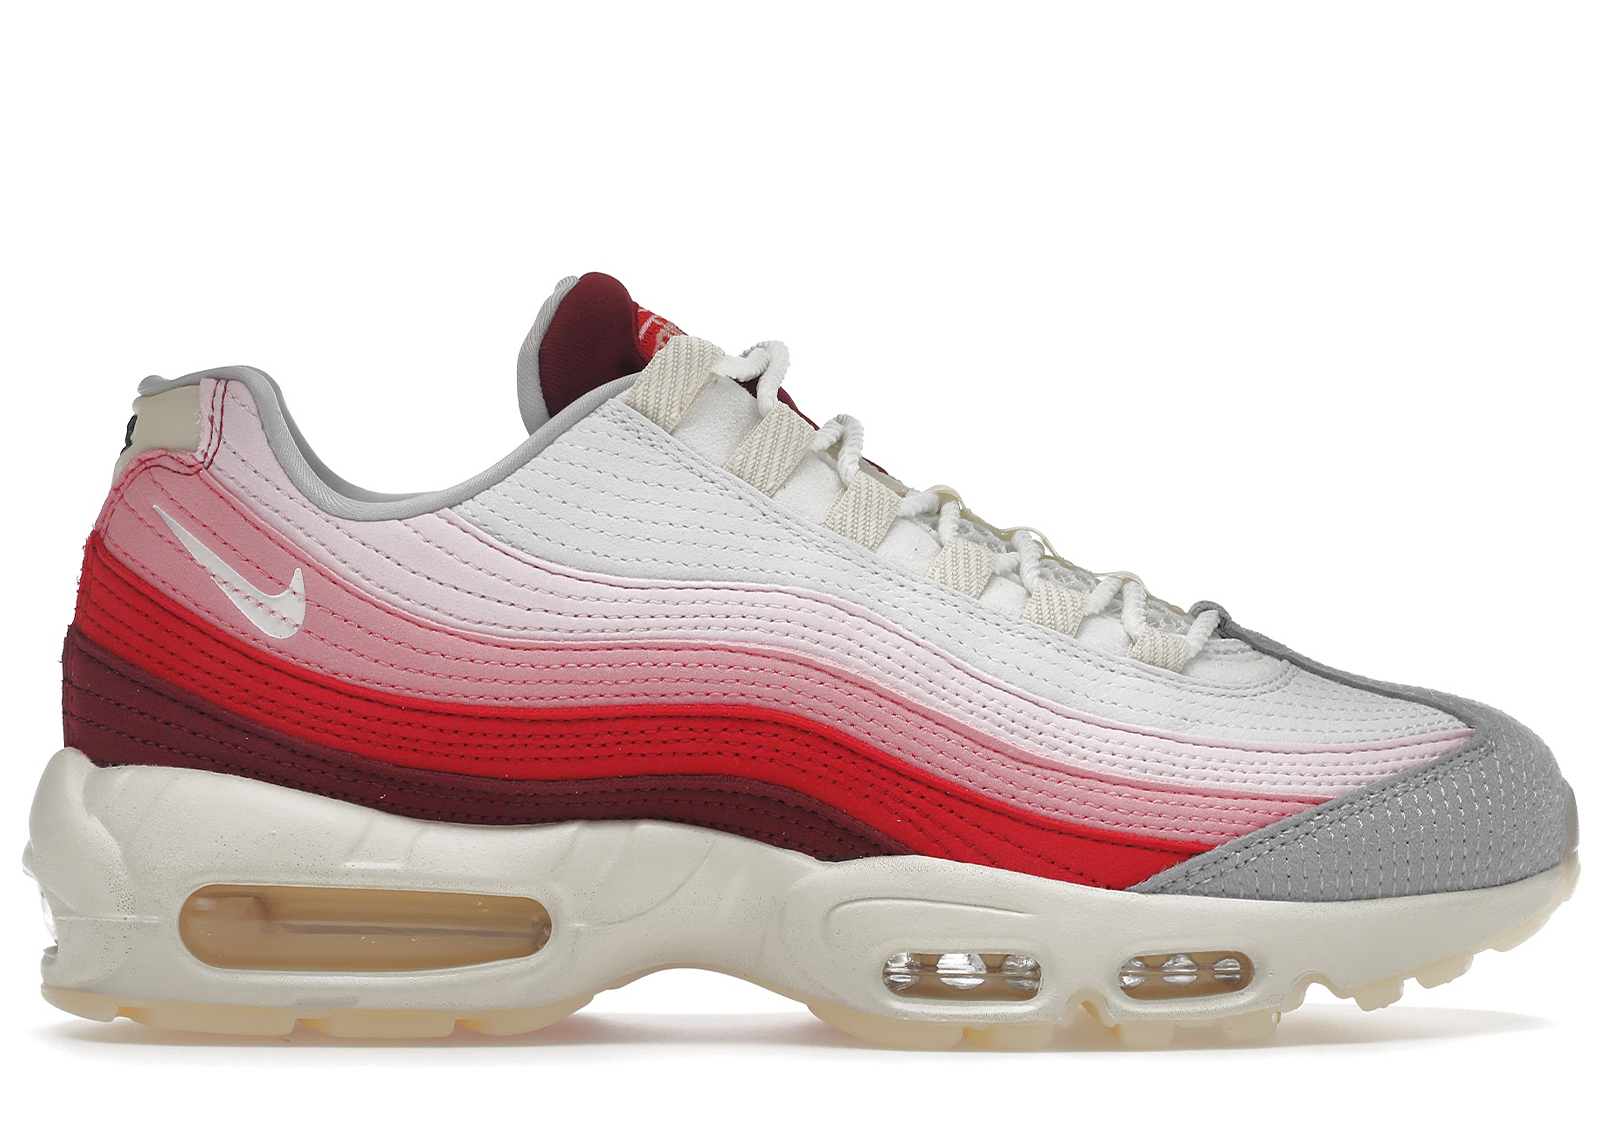 Nike Air Max 95 Shoes - Release Date